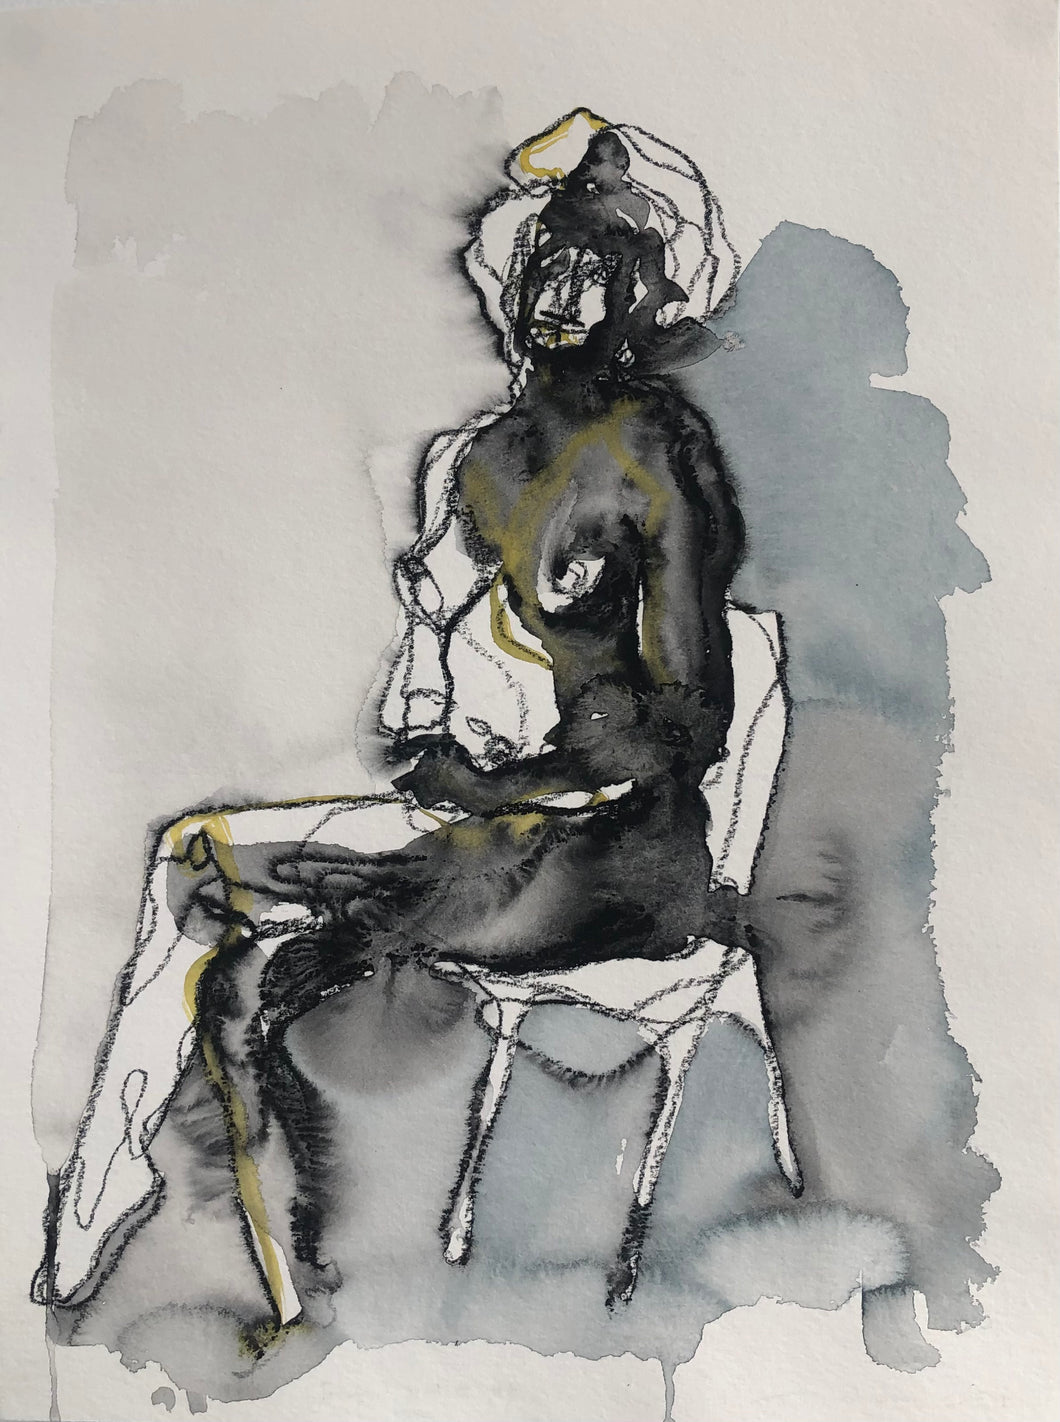 Drawn 6 (2022) charcoal and watercolour on paper